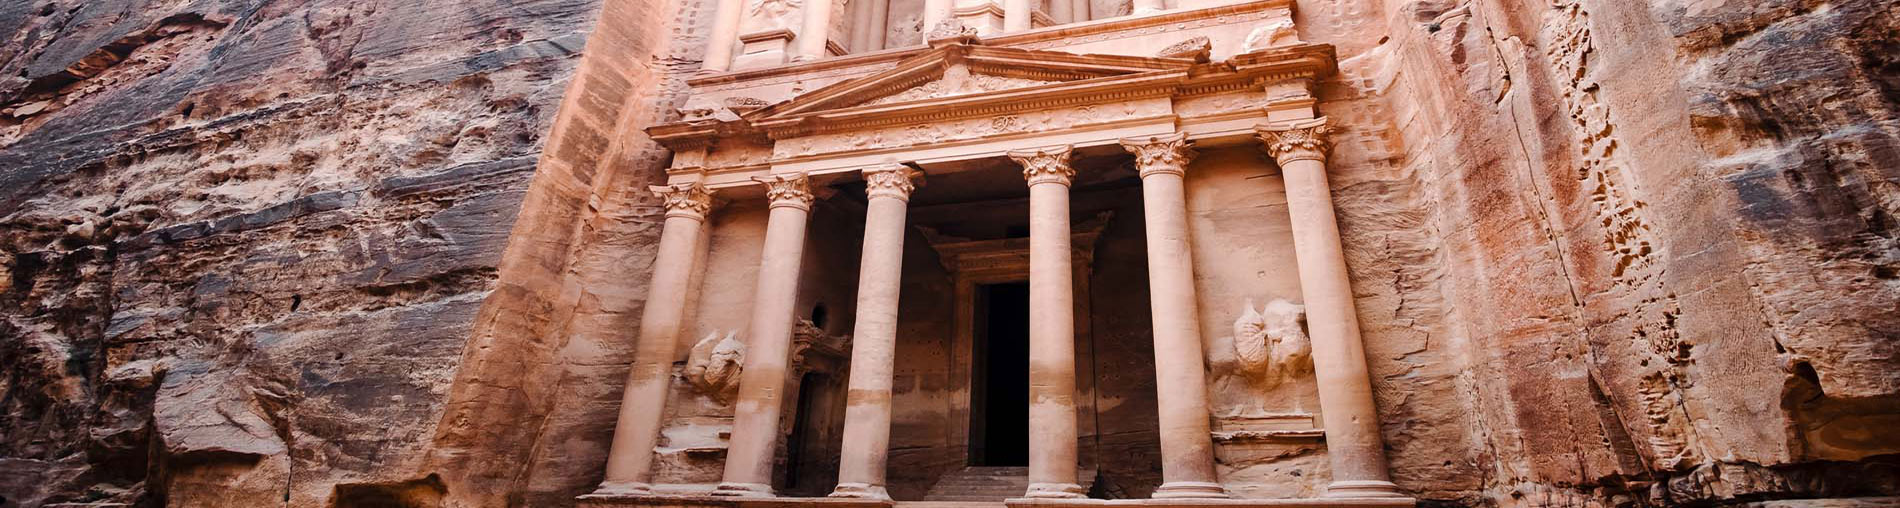 Gems of Jordan Tour Package From India